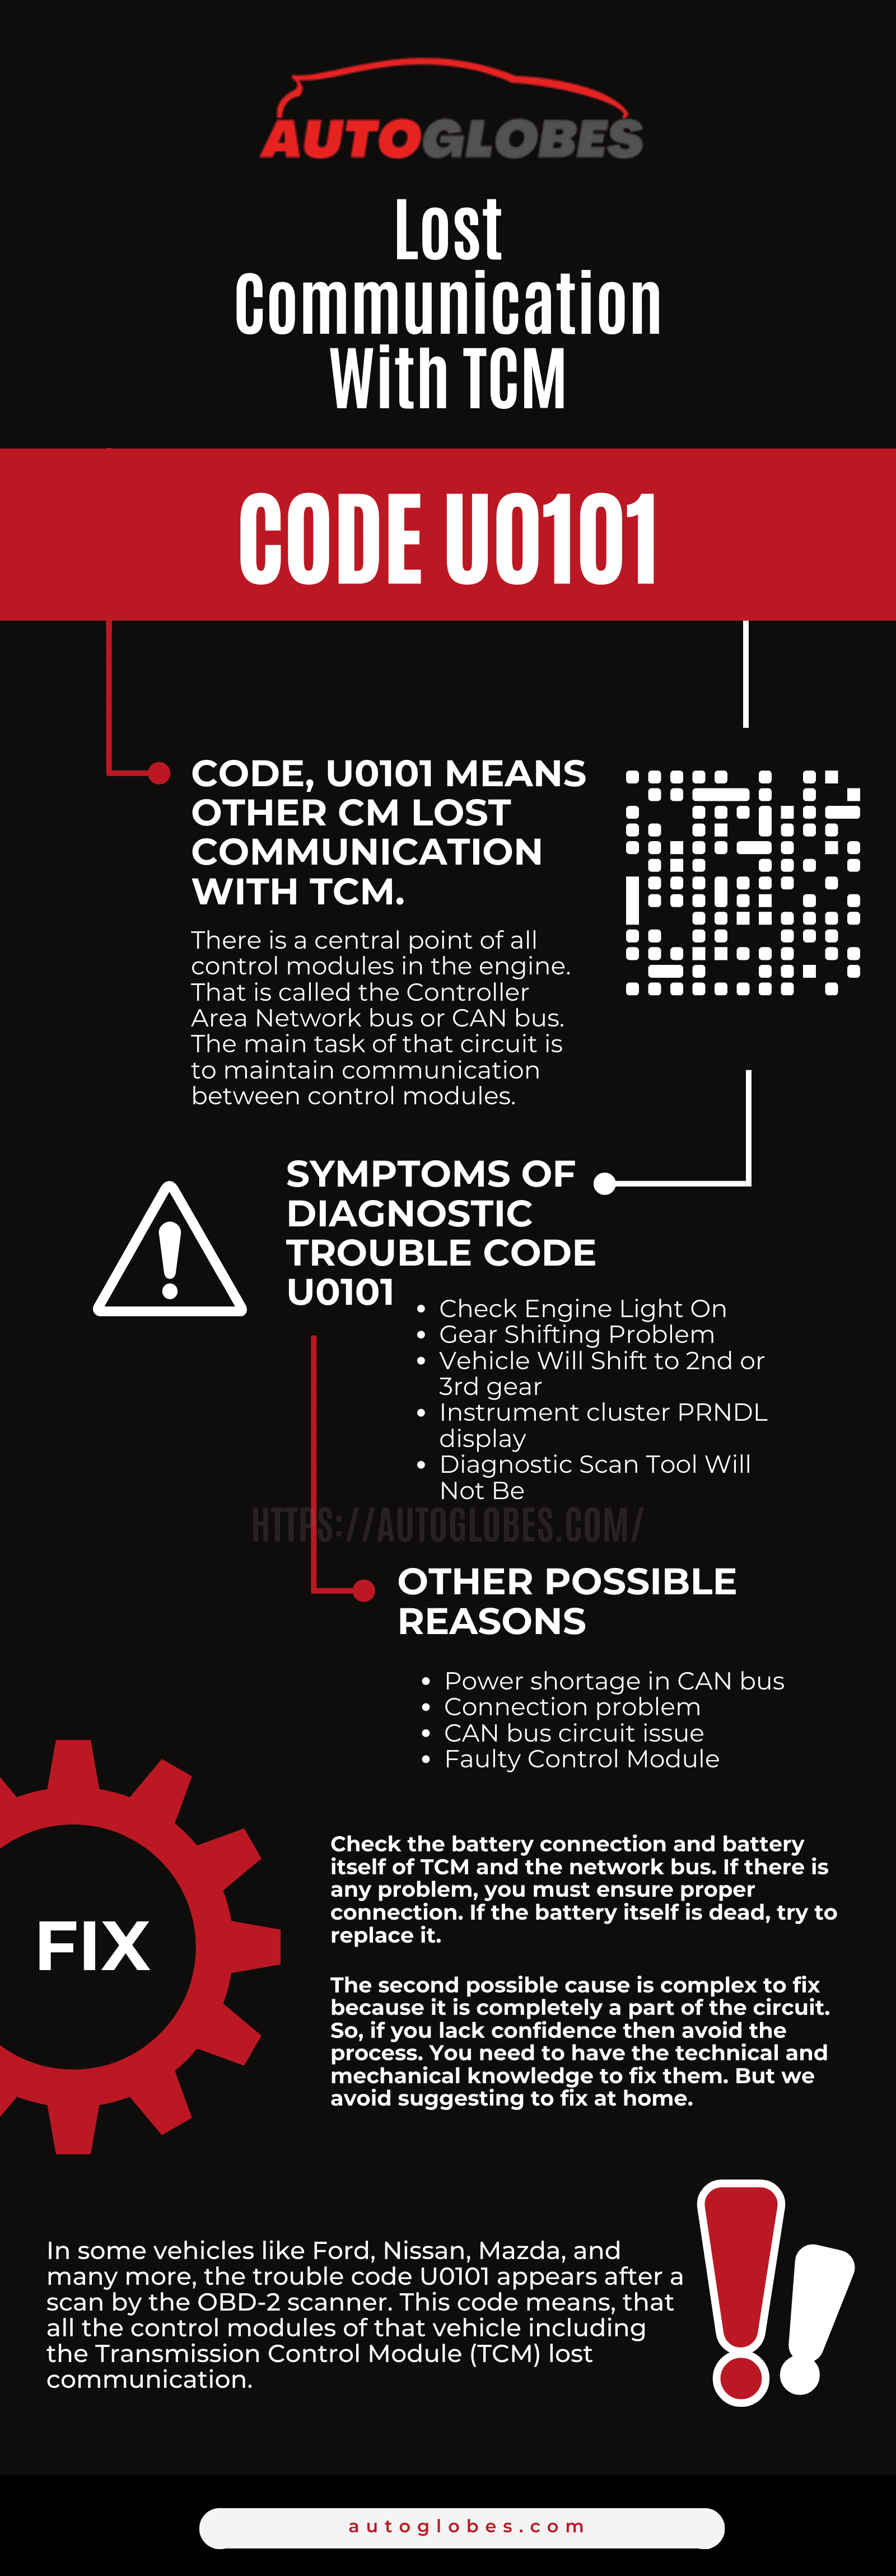 Code U0101 Lost Communication With TCM Infographic